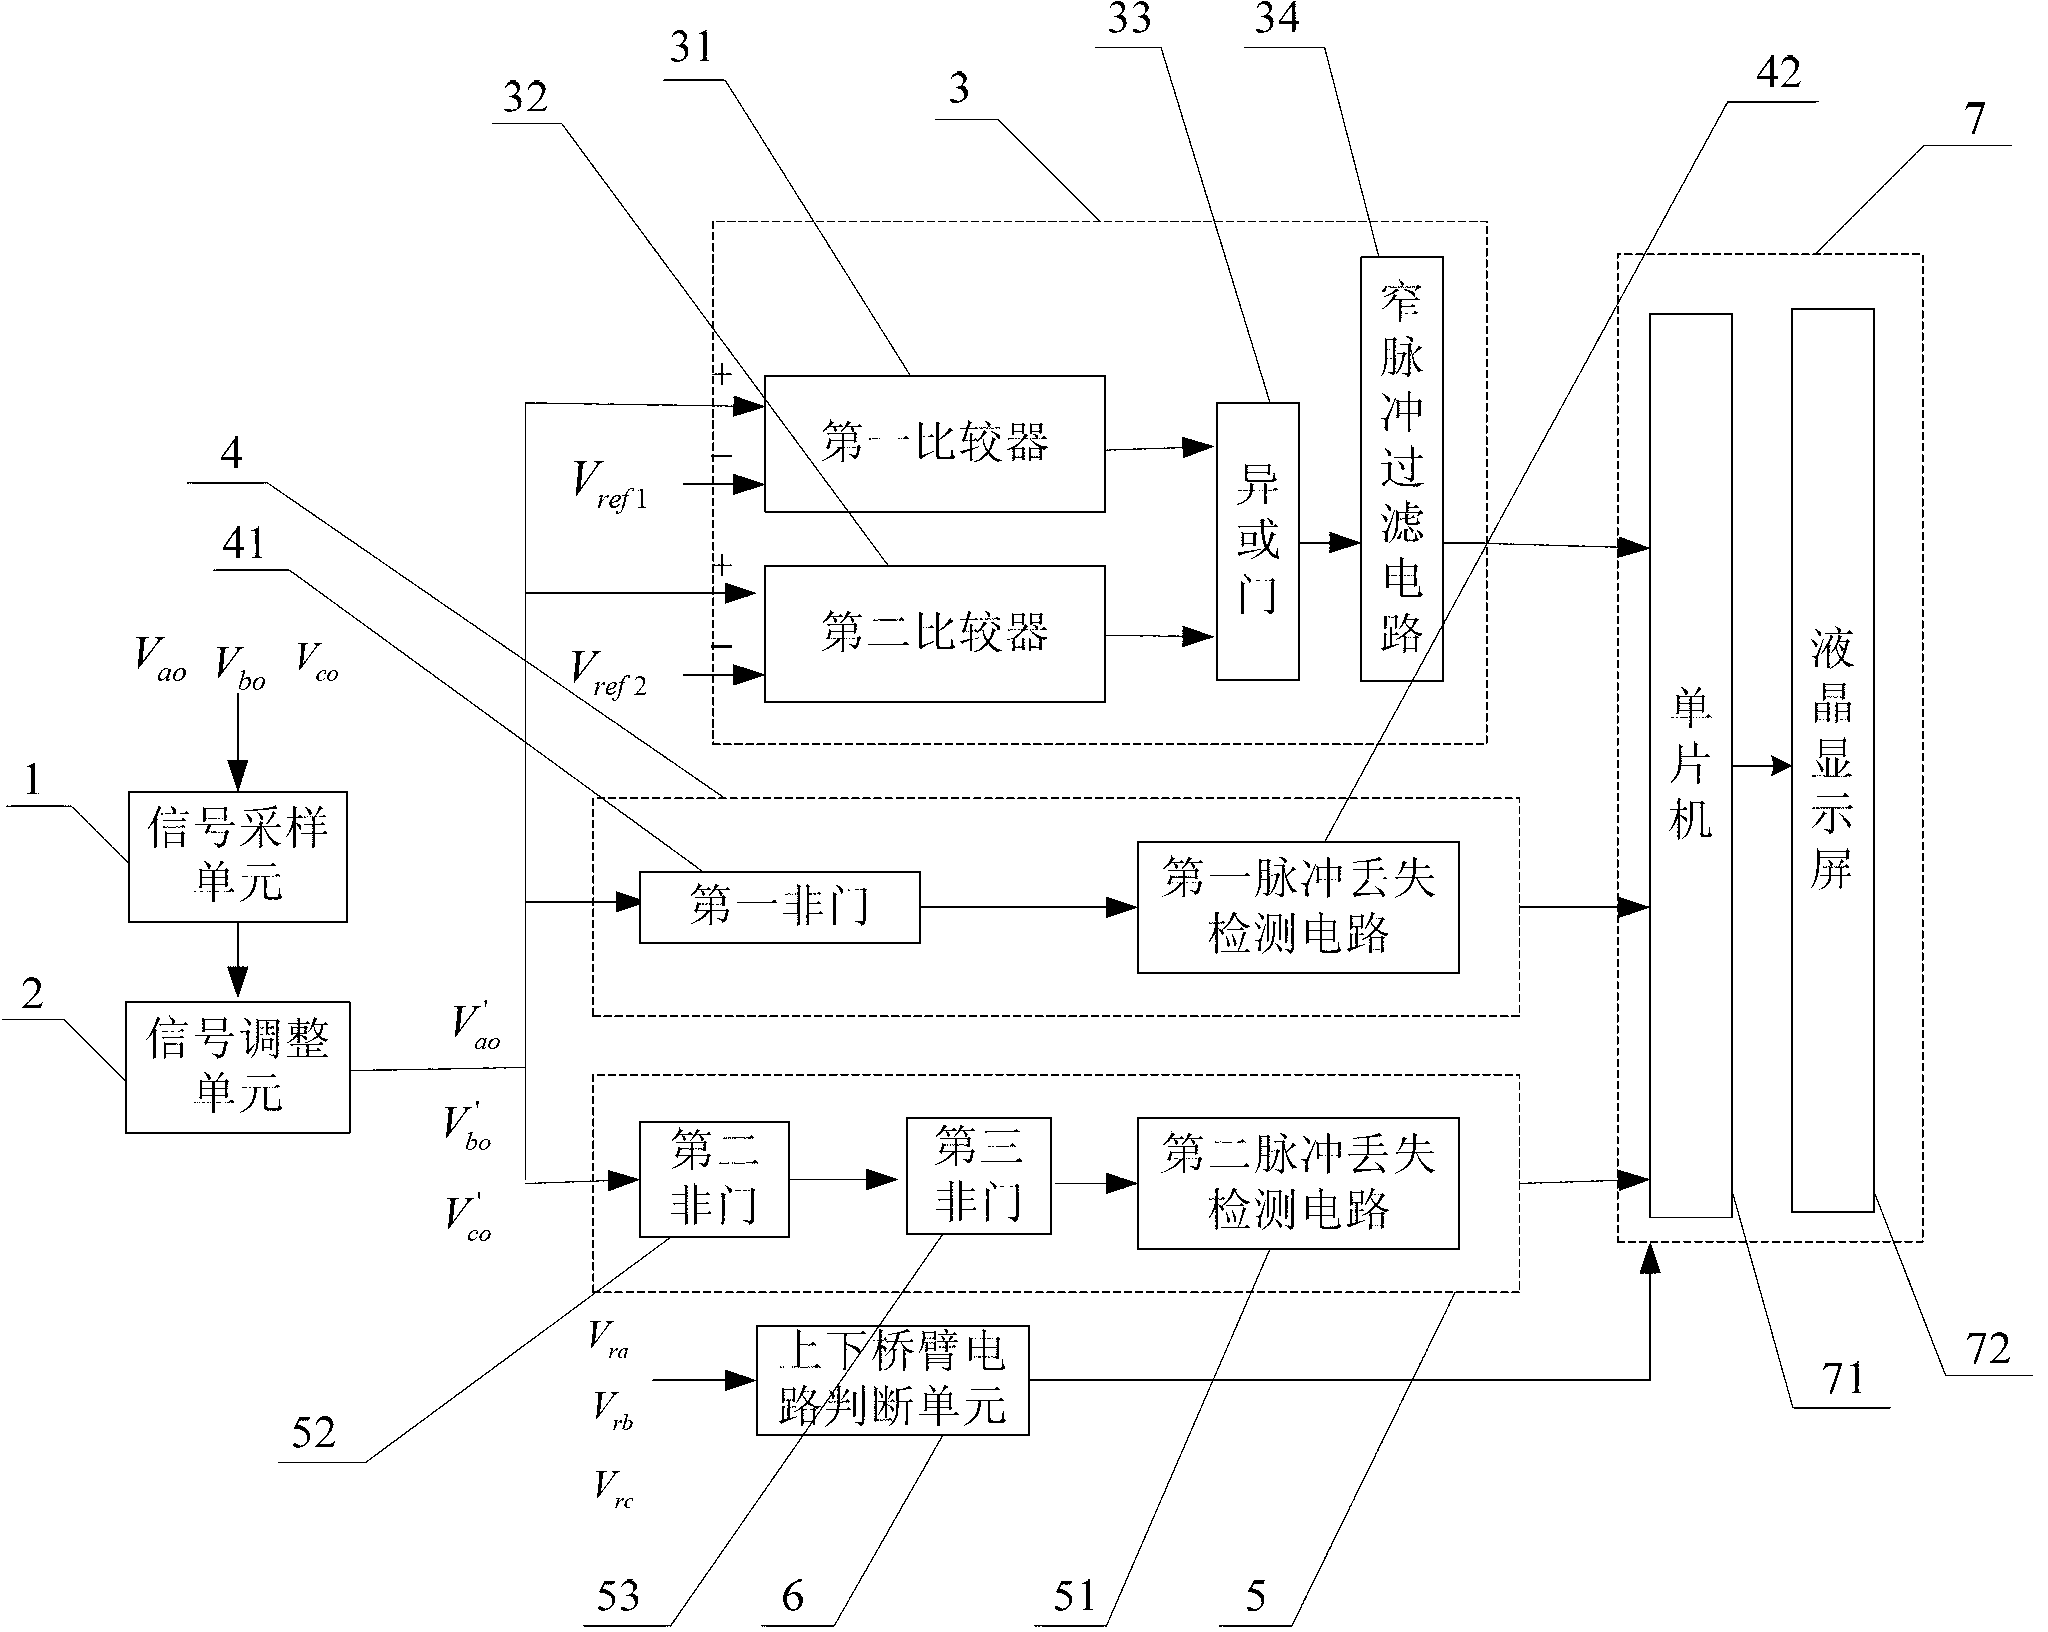 Device open-circuit fault diagnosis circuit for diode neutral point clamped (NPC) three-level inverter